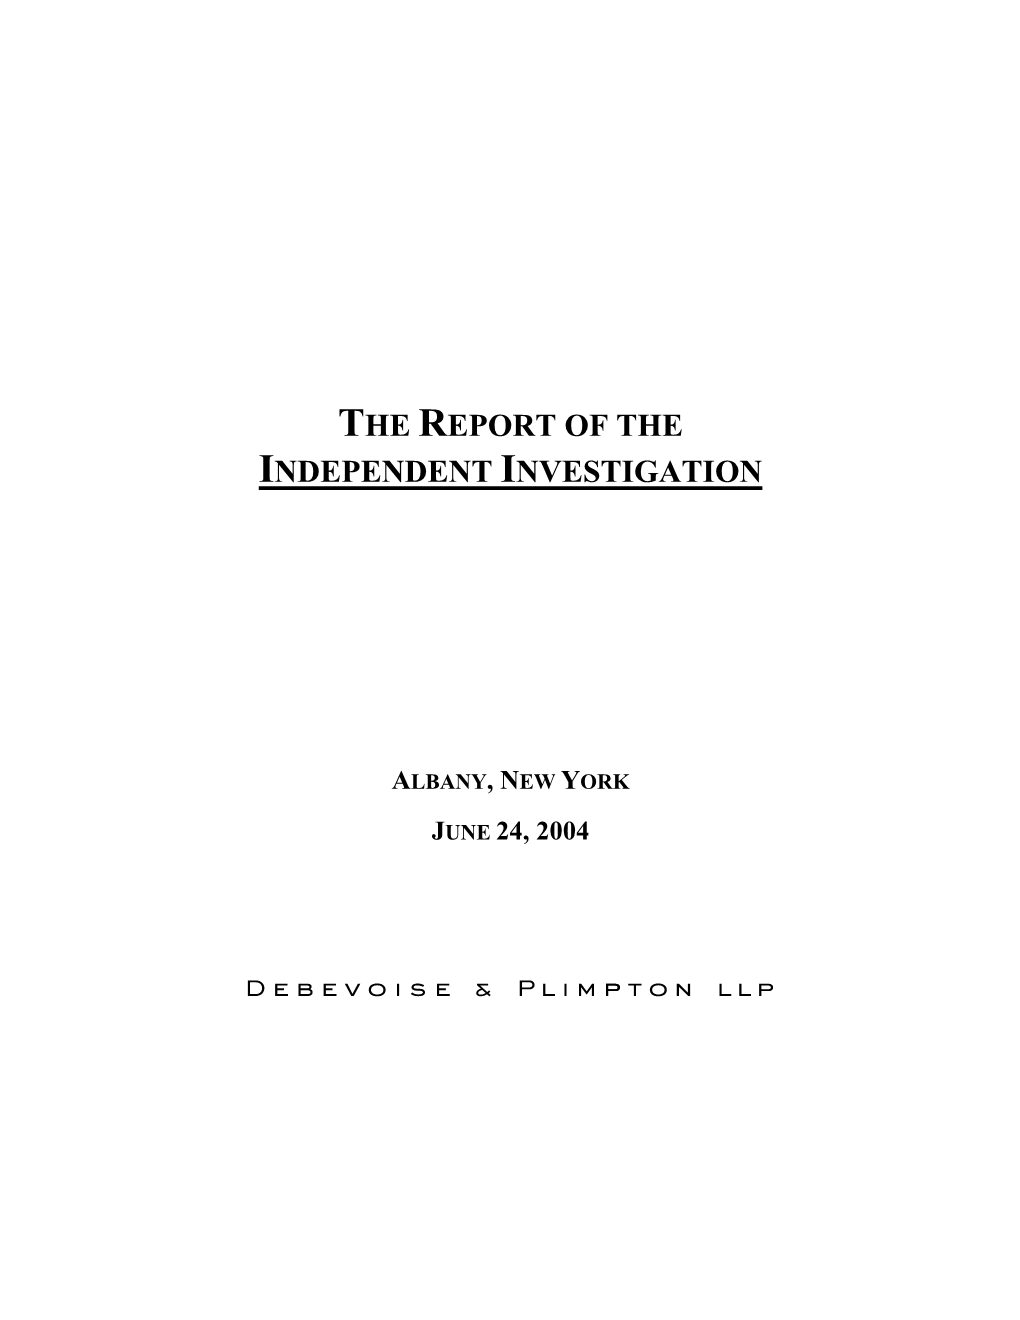 The Report of the Independent Investigation